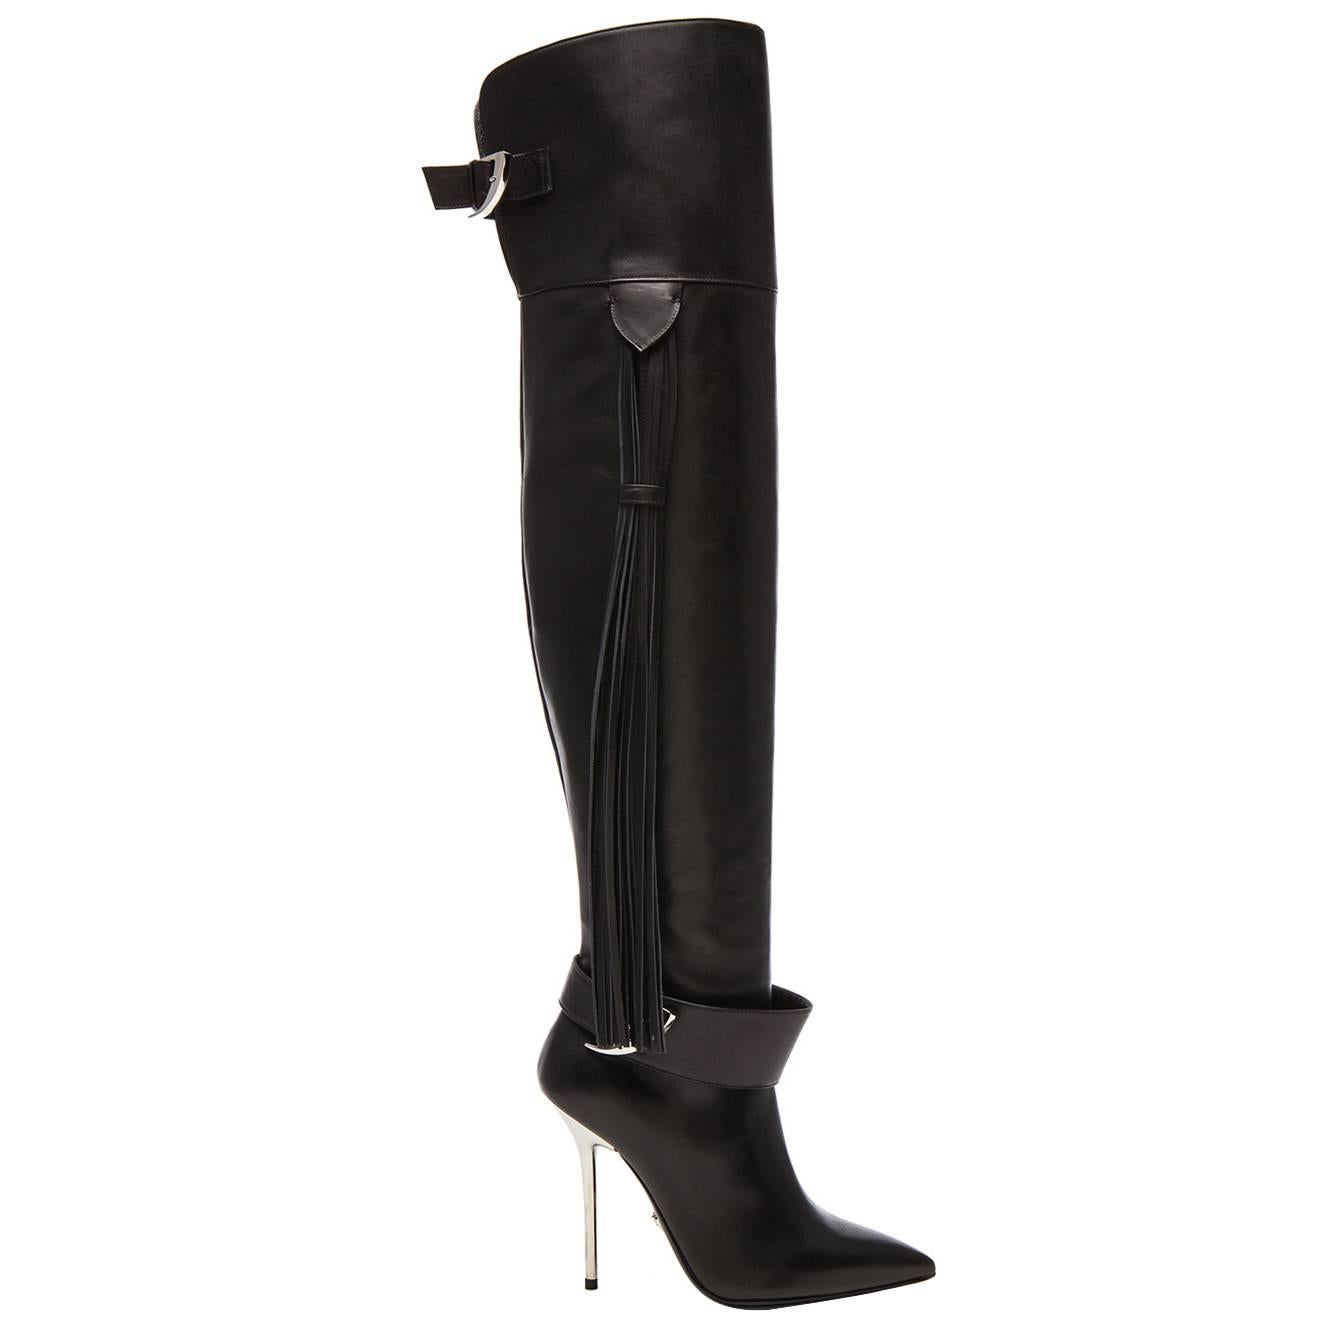 Pre-Fall/14 L#9 VERSACE BLACK LEATHER OVET-the-KNEE Boots with TASSELS 35, 36, 39